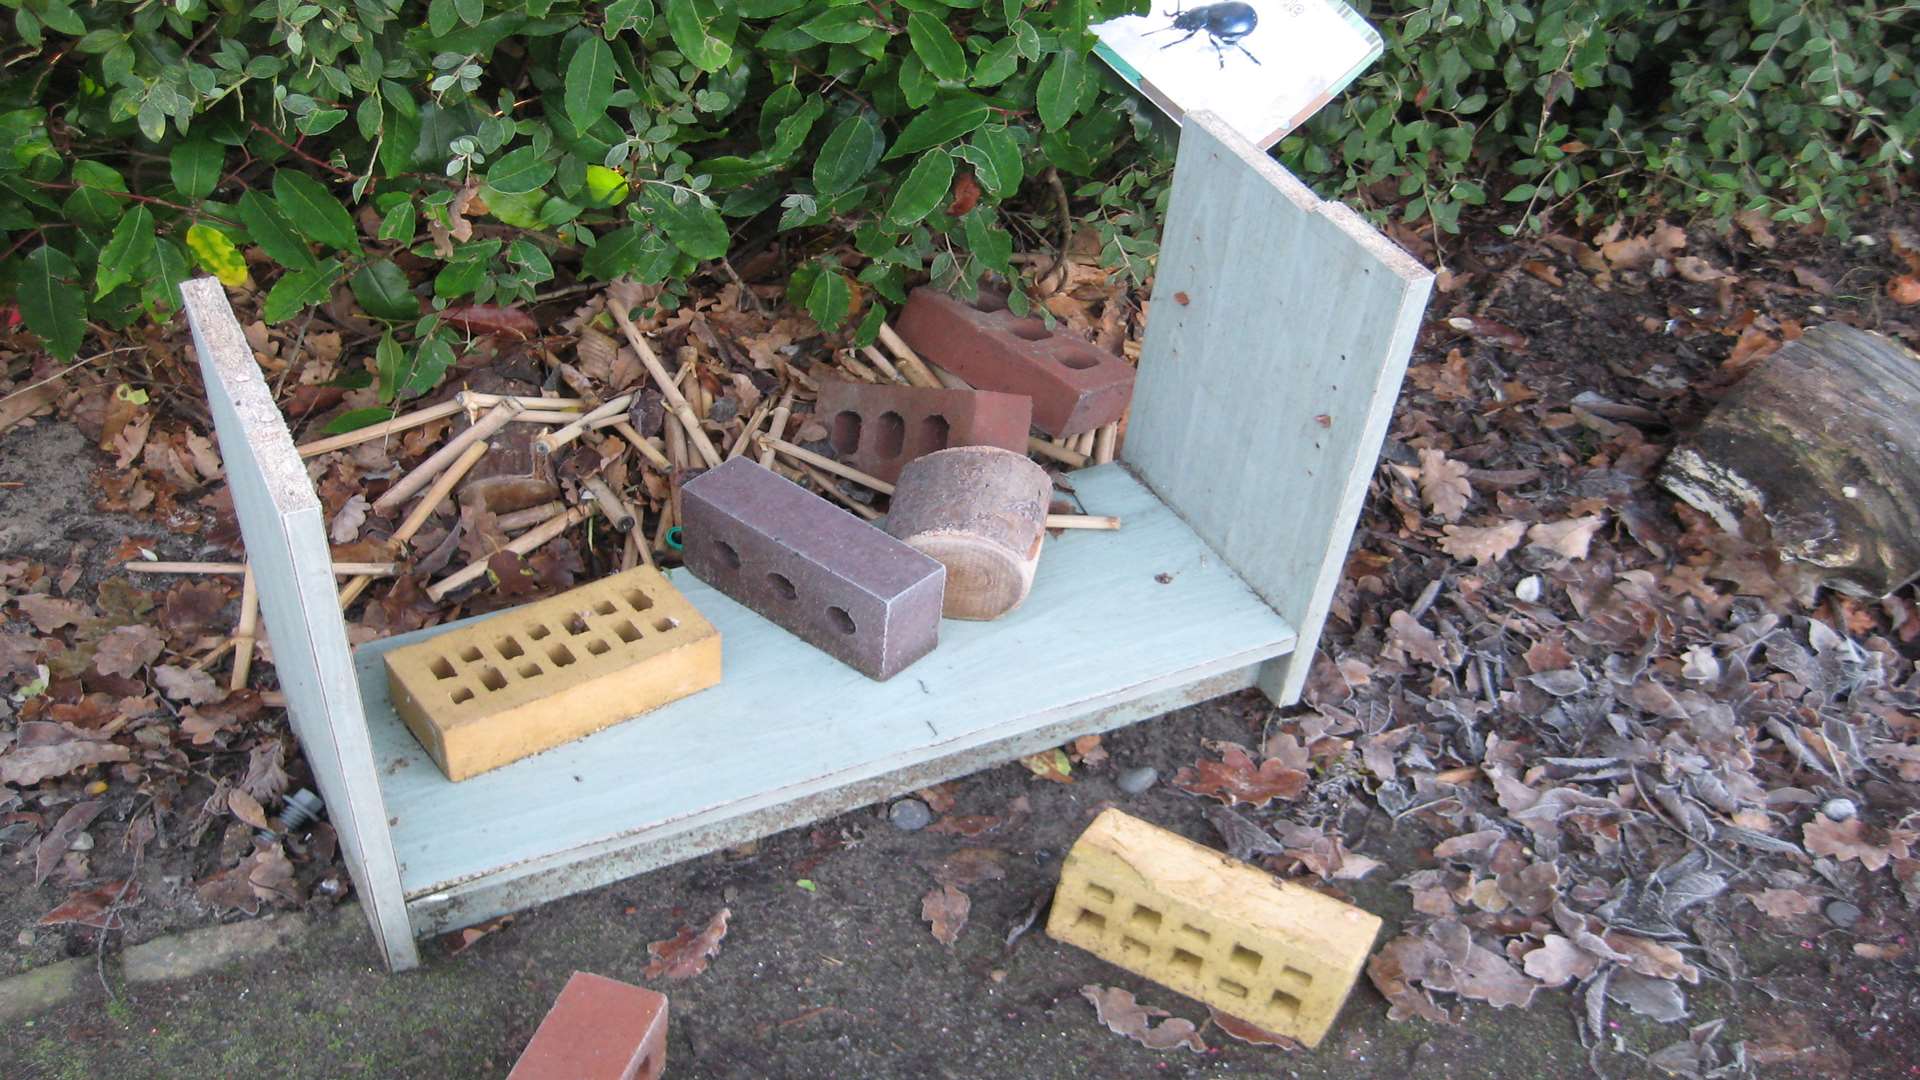 The bug hotel at the school was broken up and the wood used for ramps